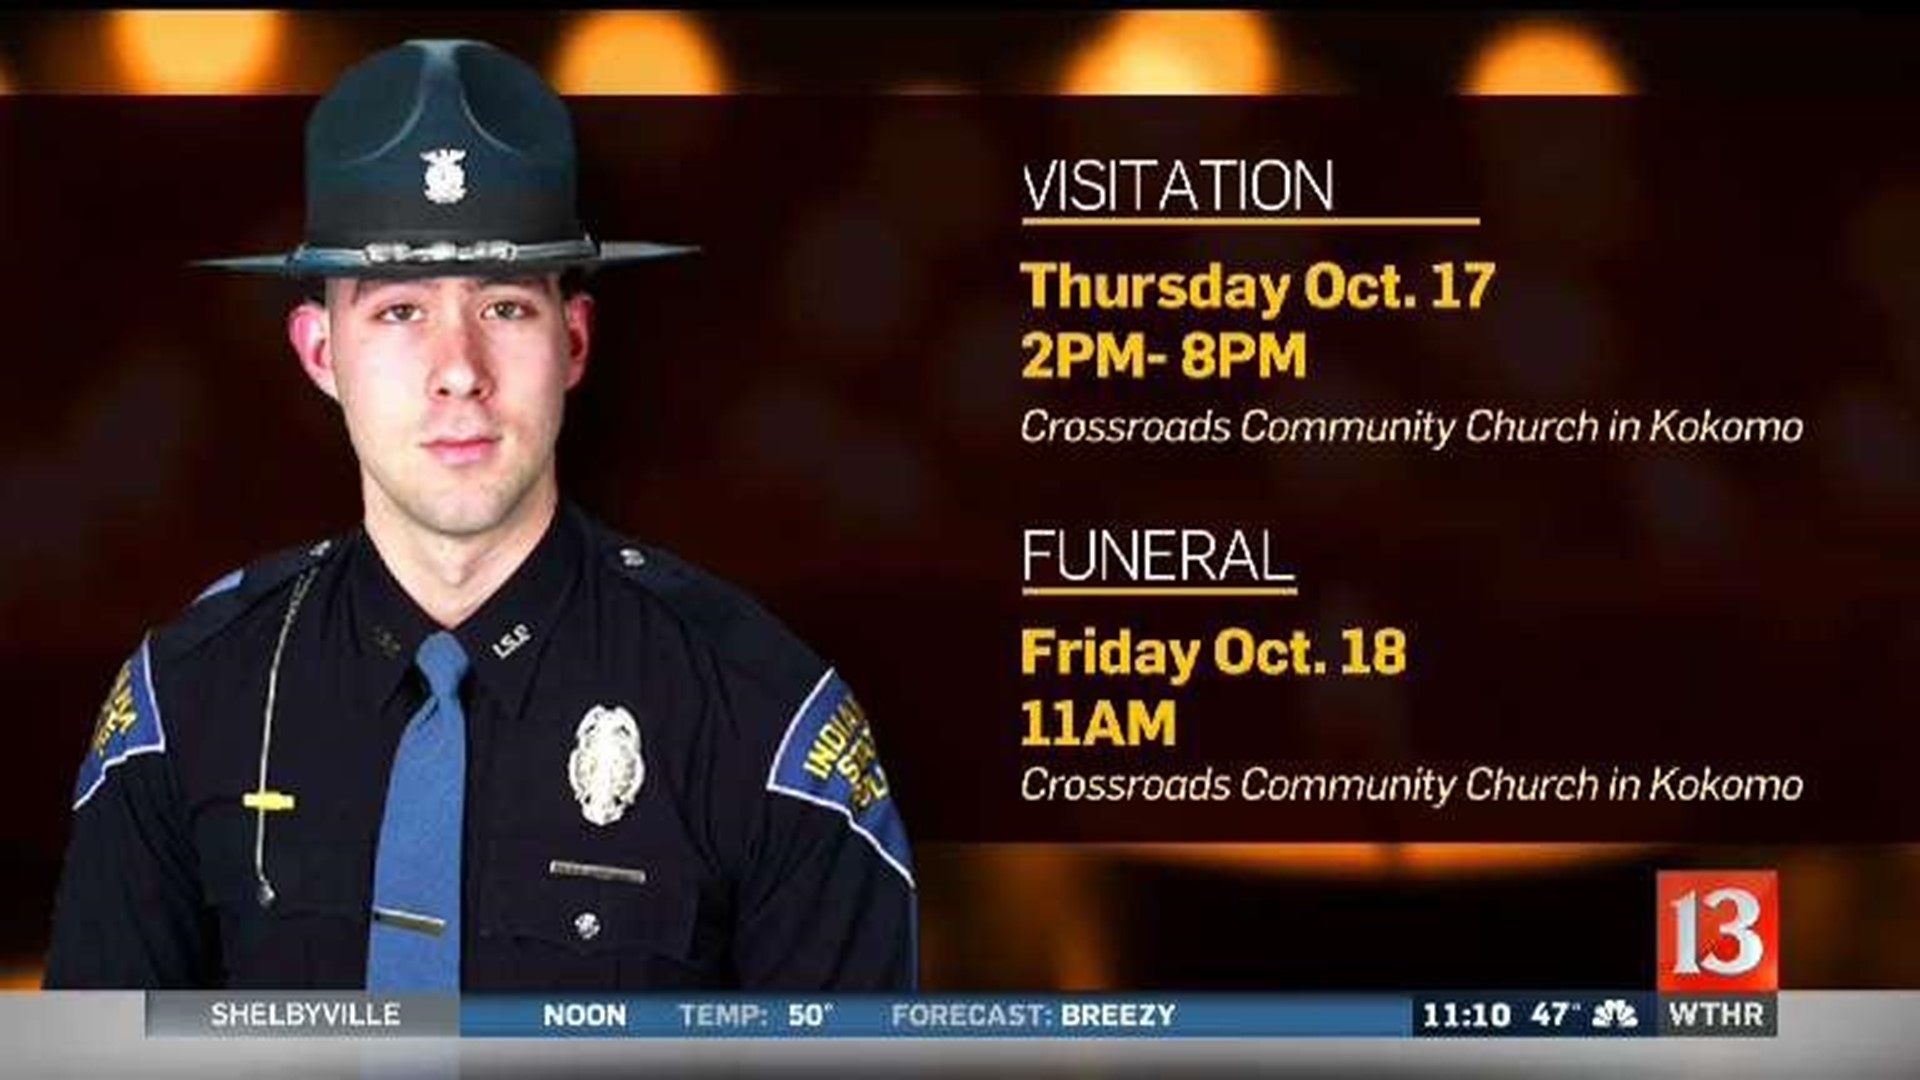 Services for Trooper Stephan